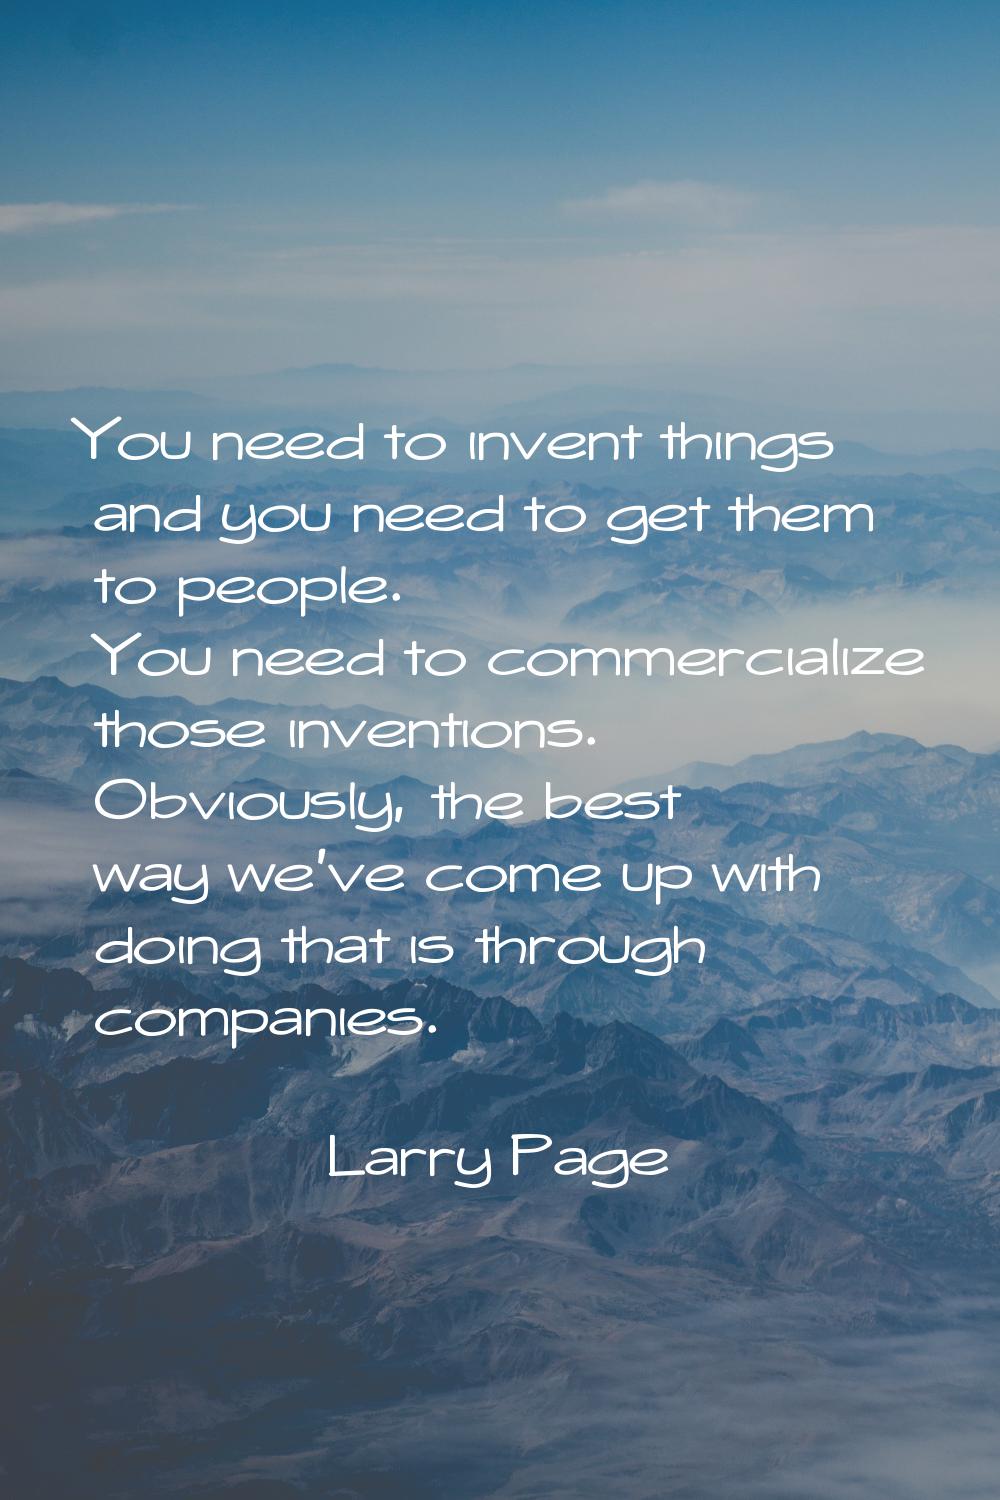 You need to invent things and you need to get them to people. You need to commercialize those inven